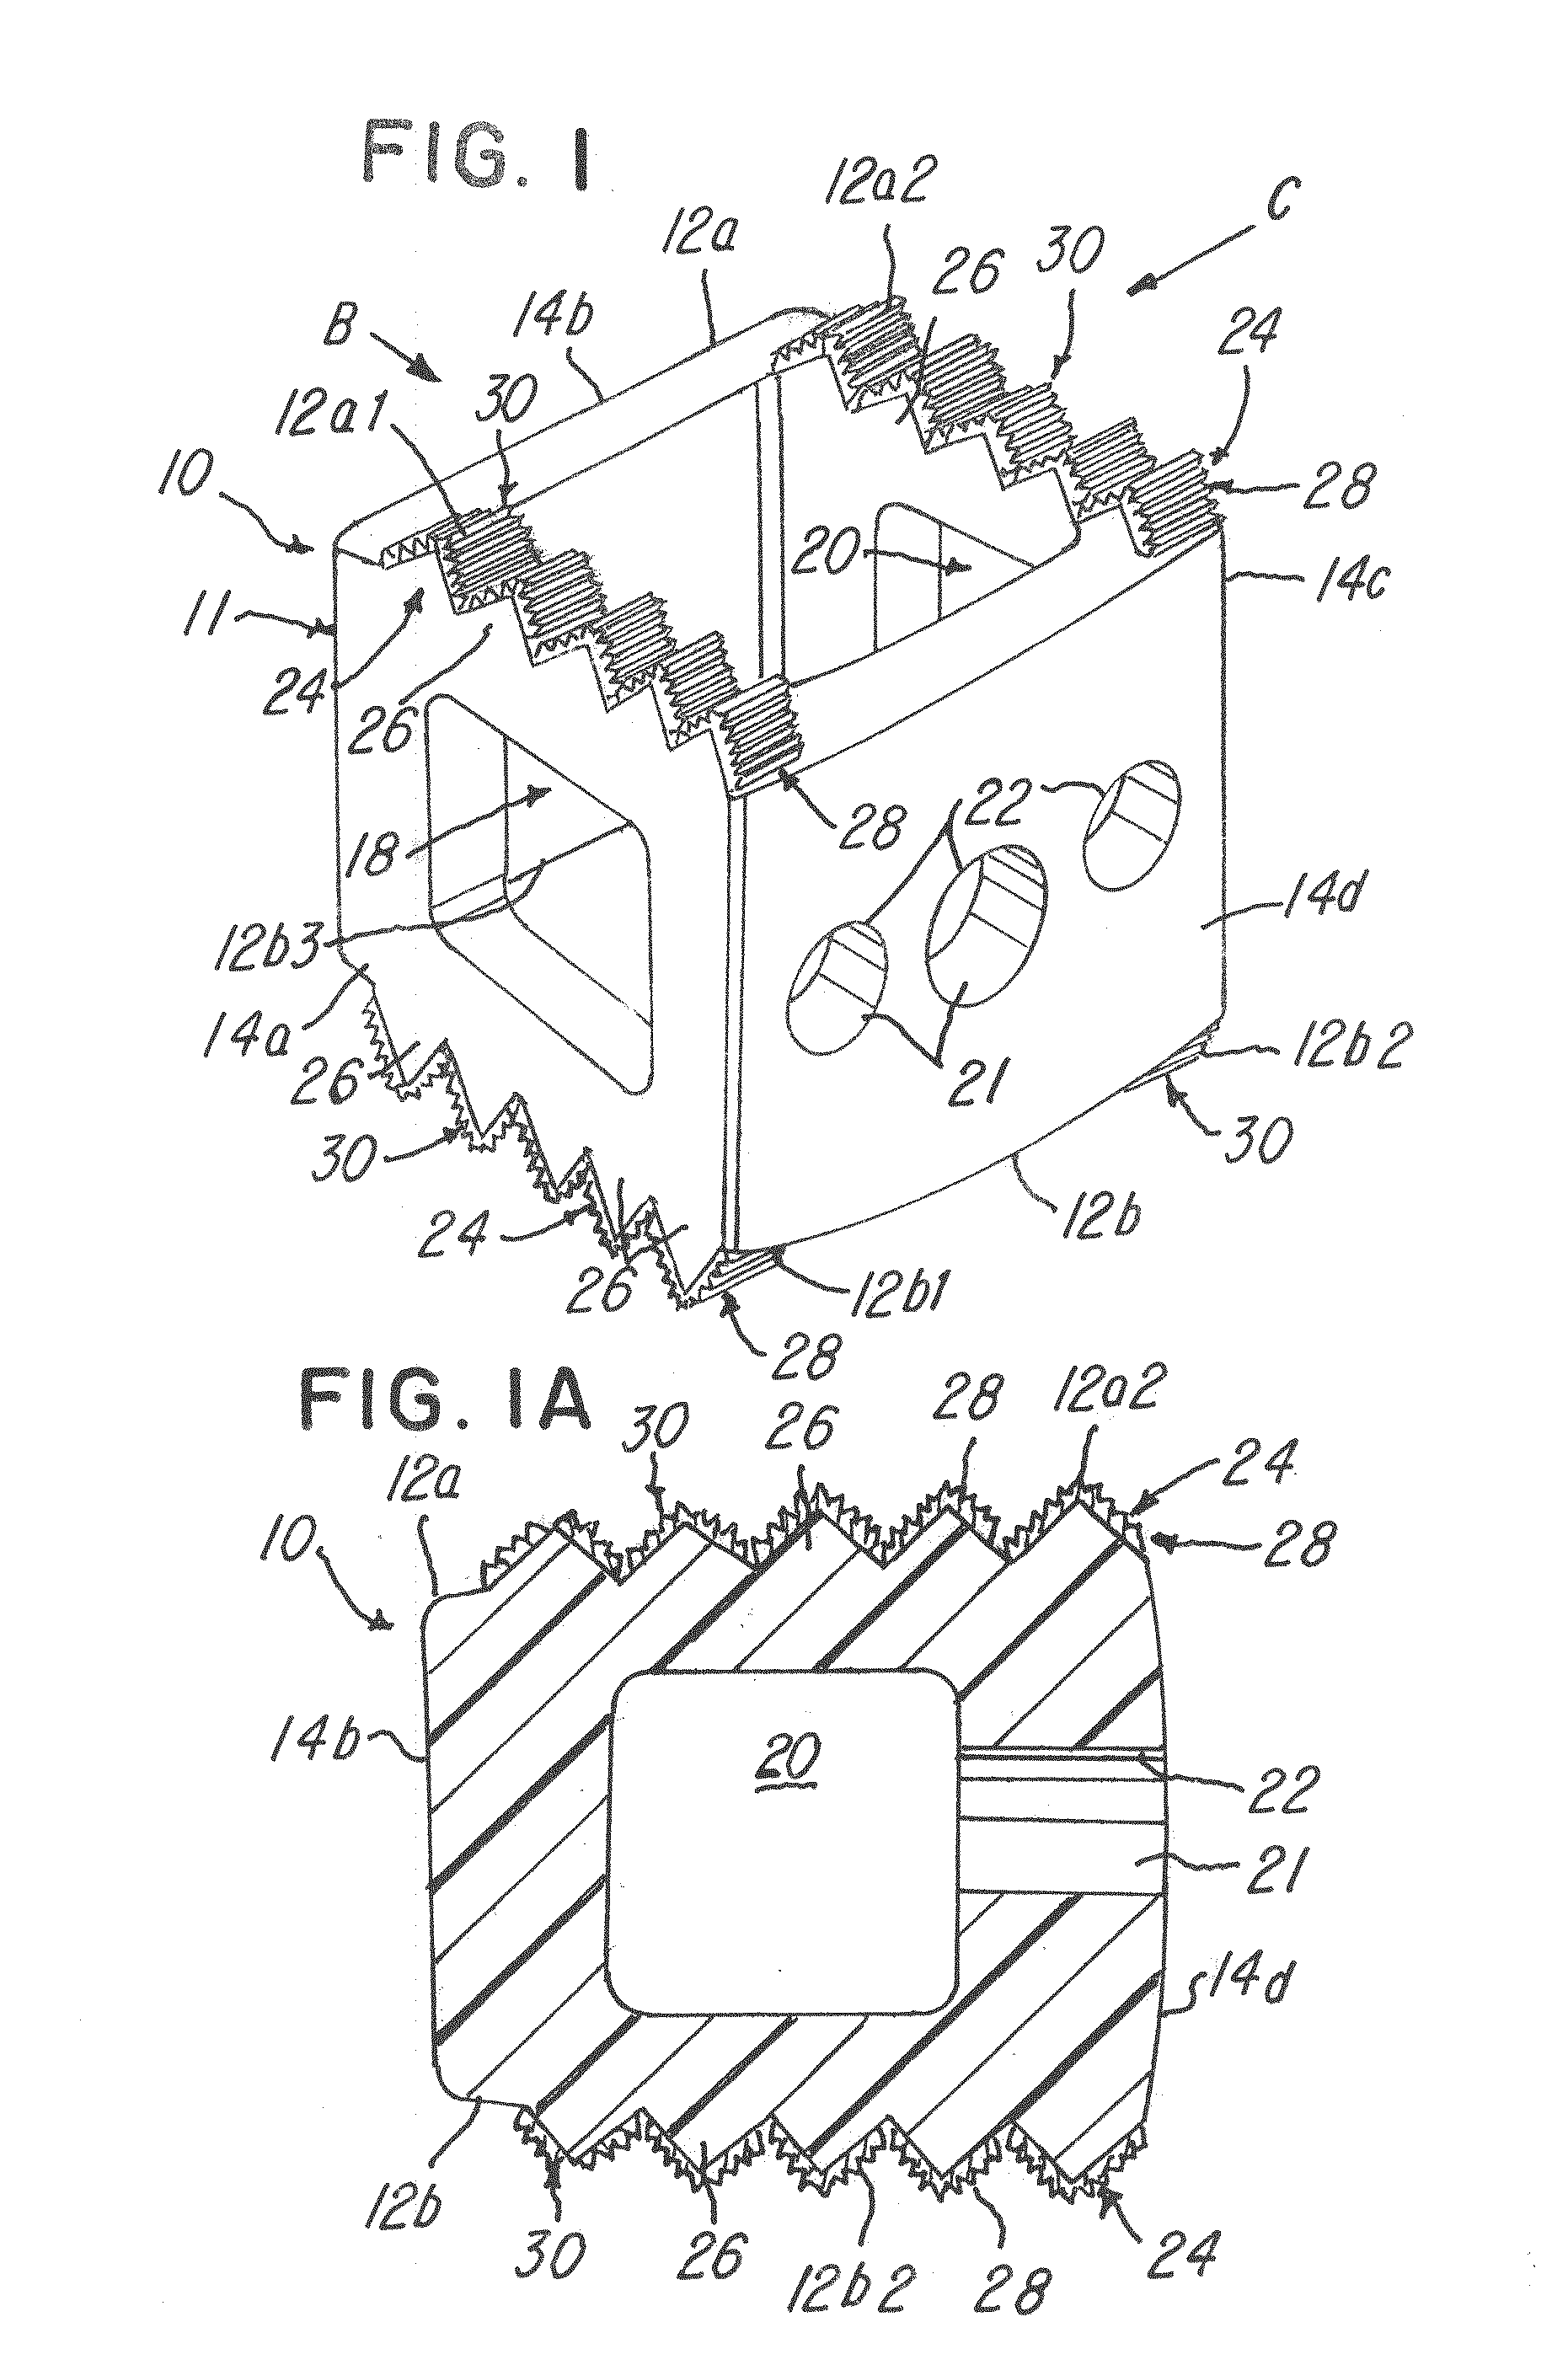 Composite orthopedic implant having a low friction material substrate with primary frictional features and secondary frictional features